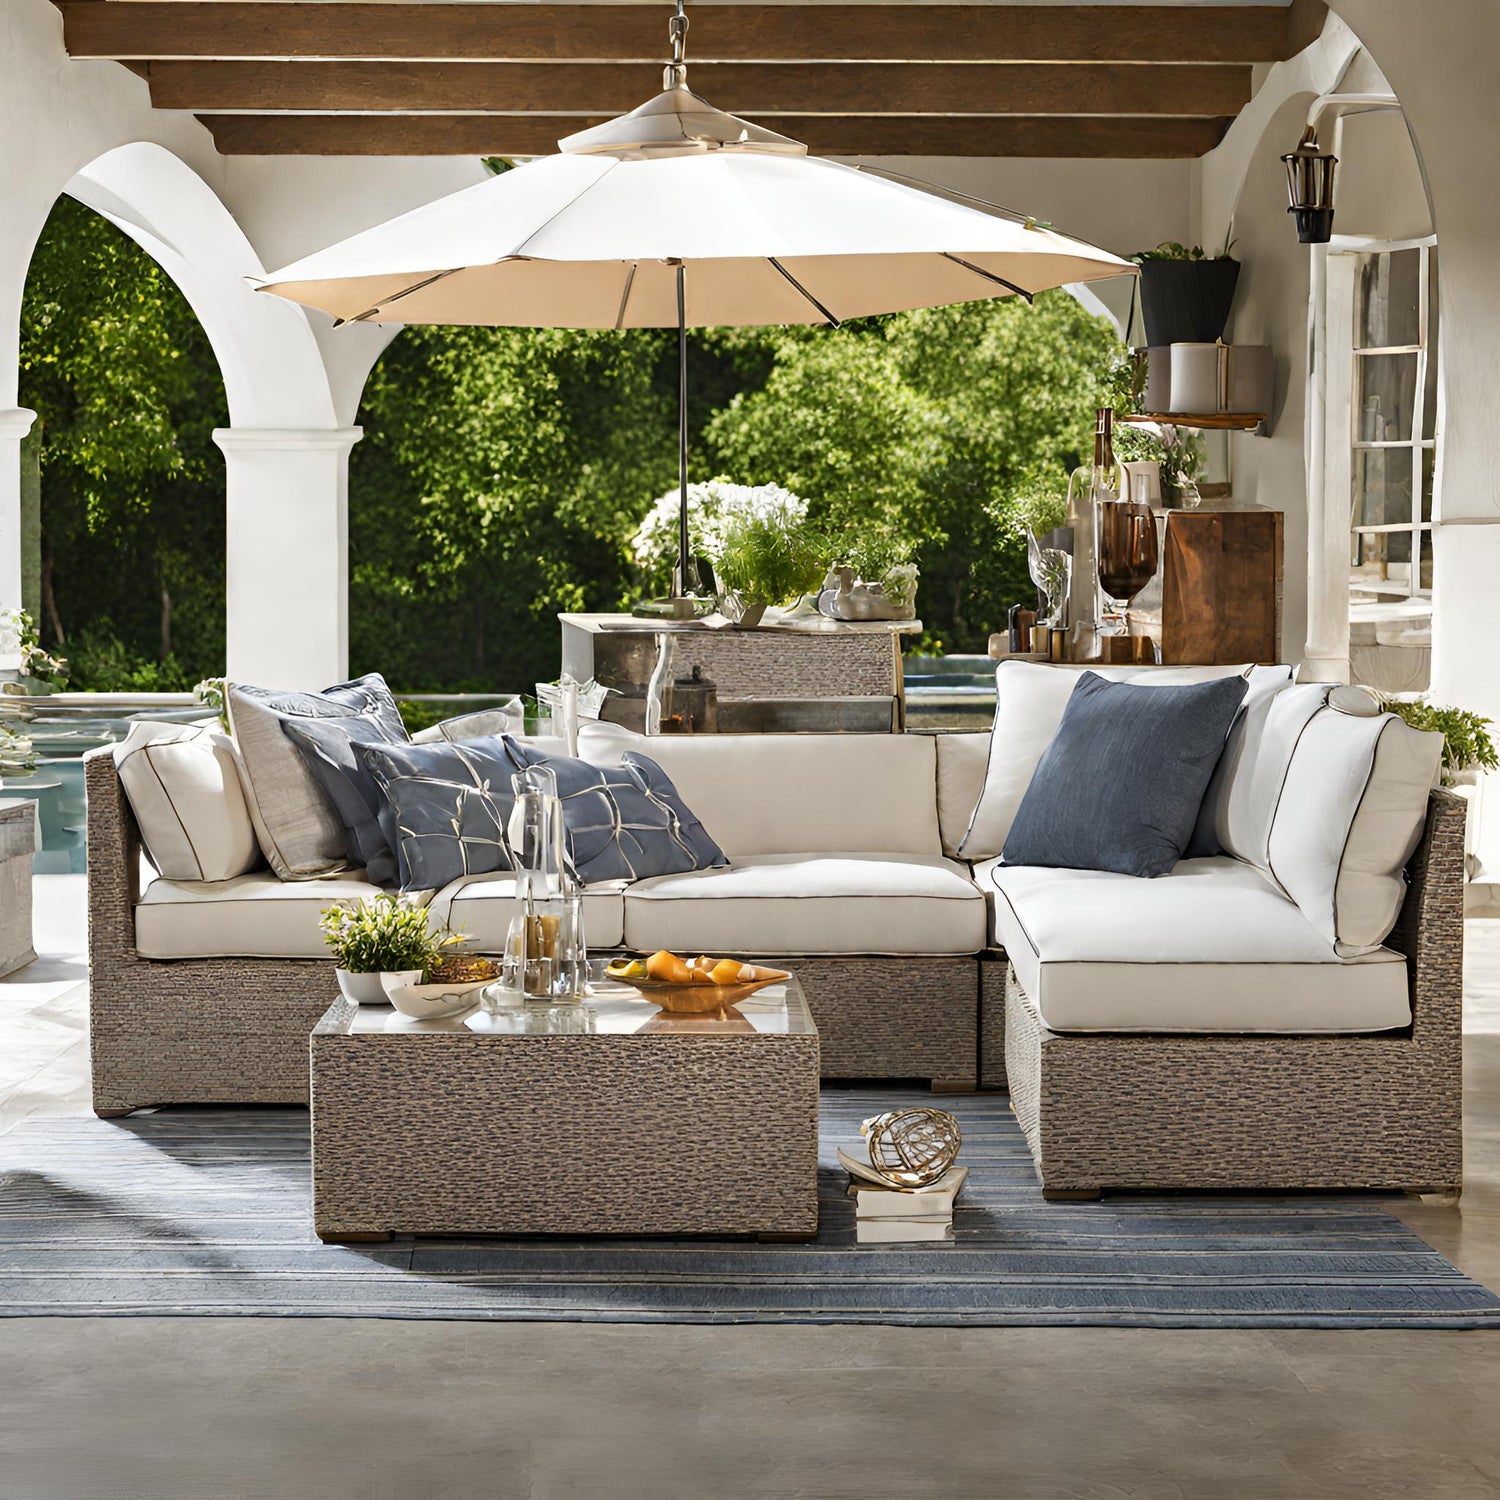 Best Outdoor Furniture Shopping List in October